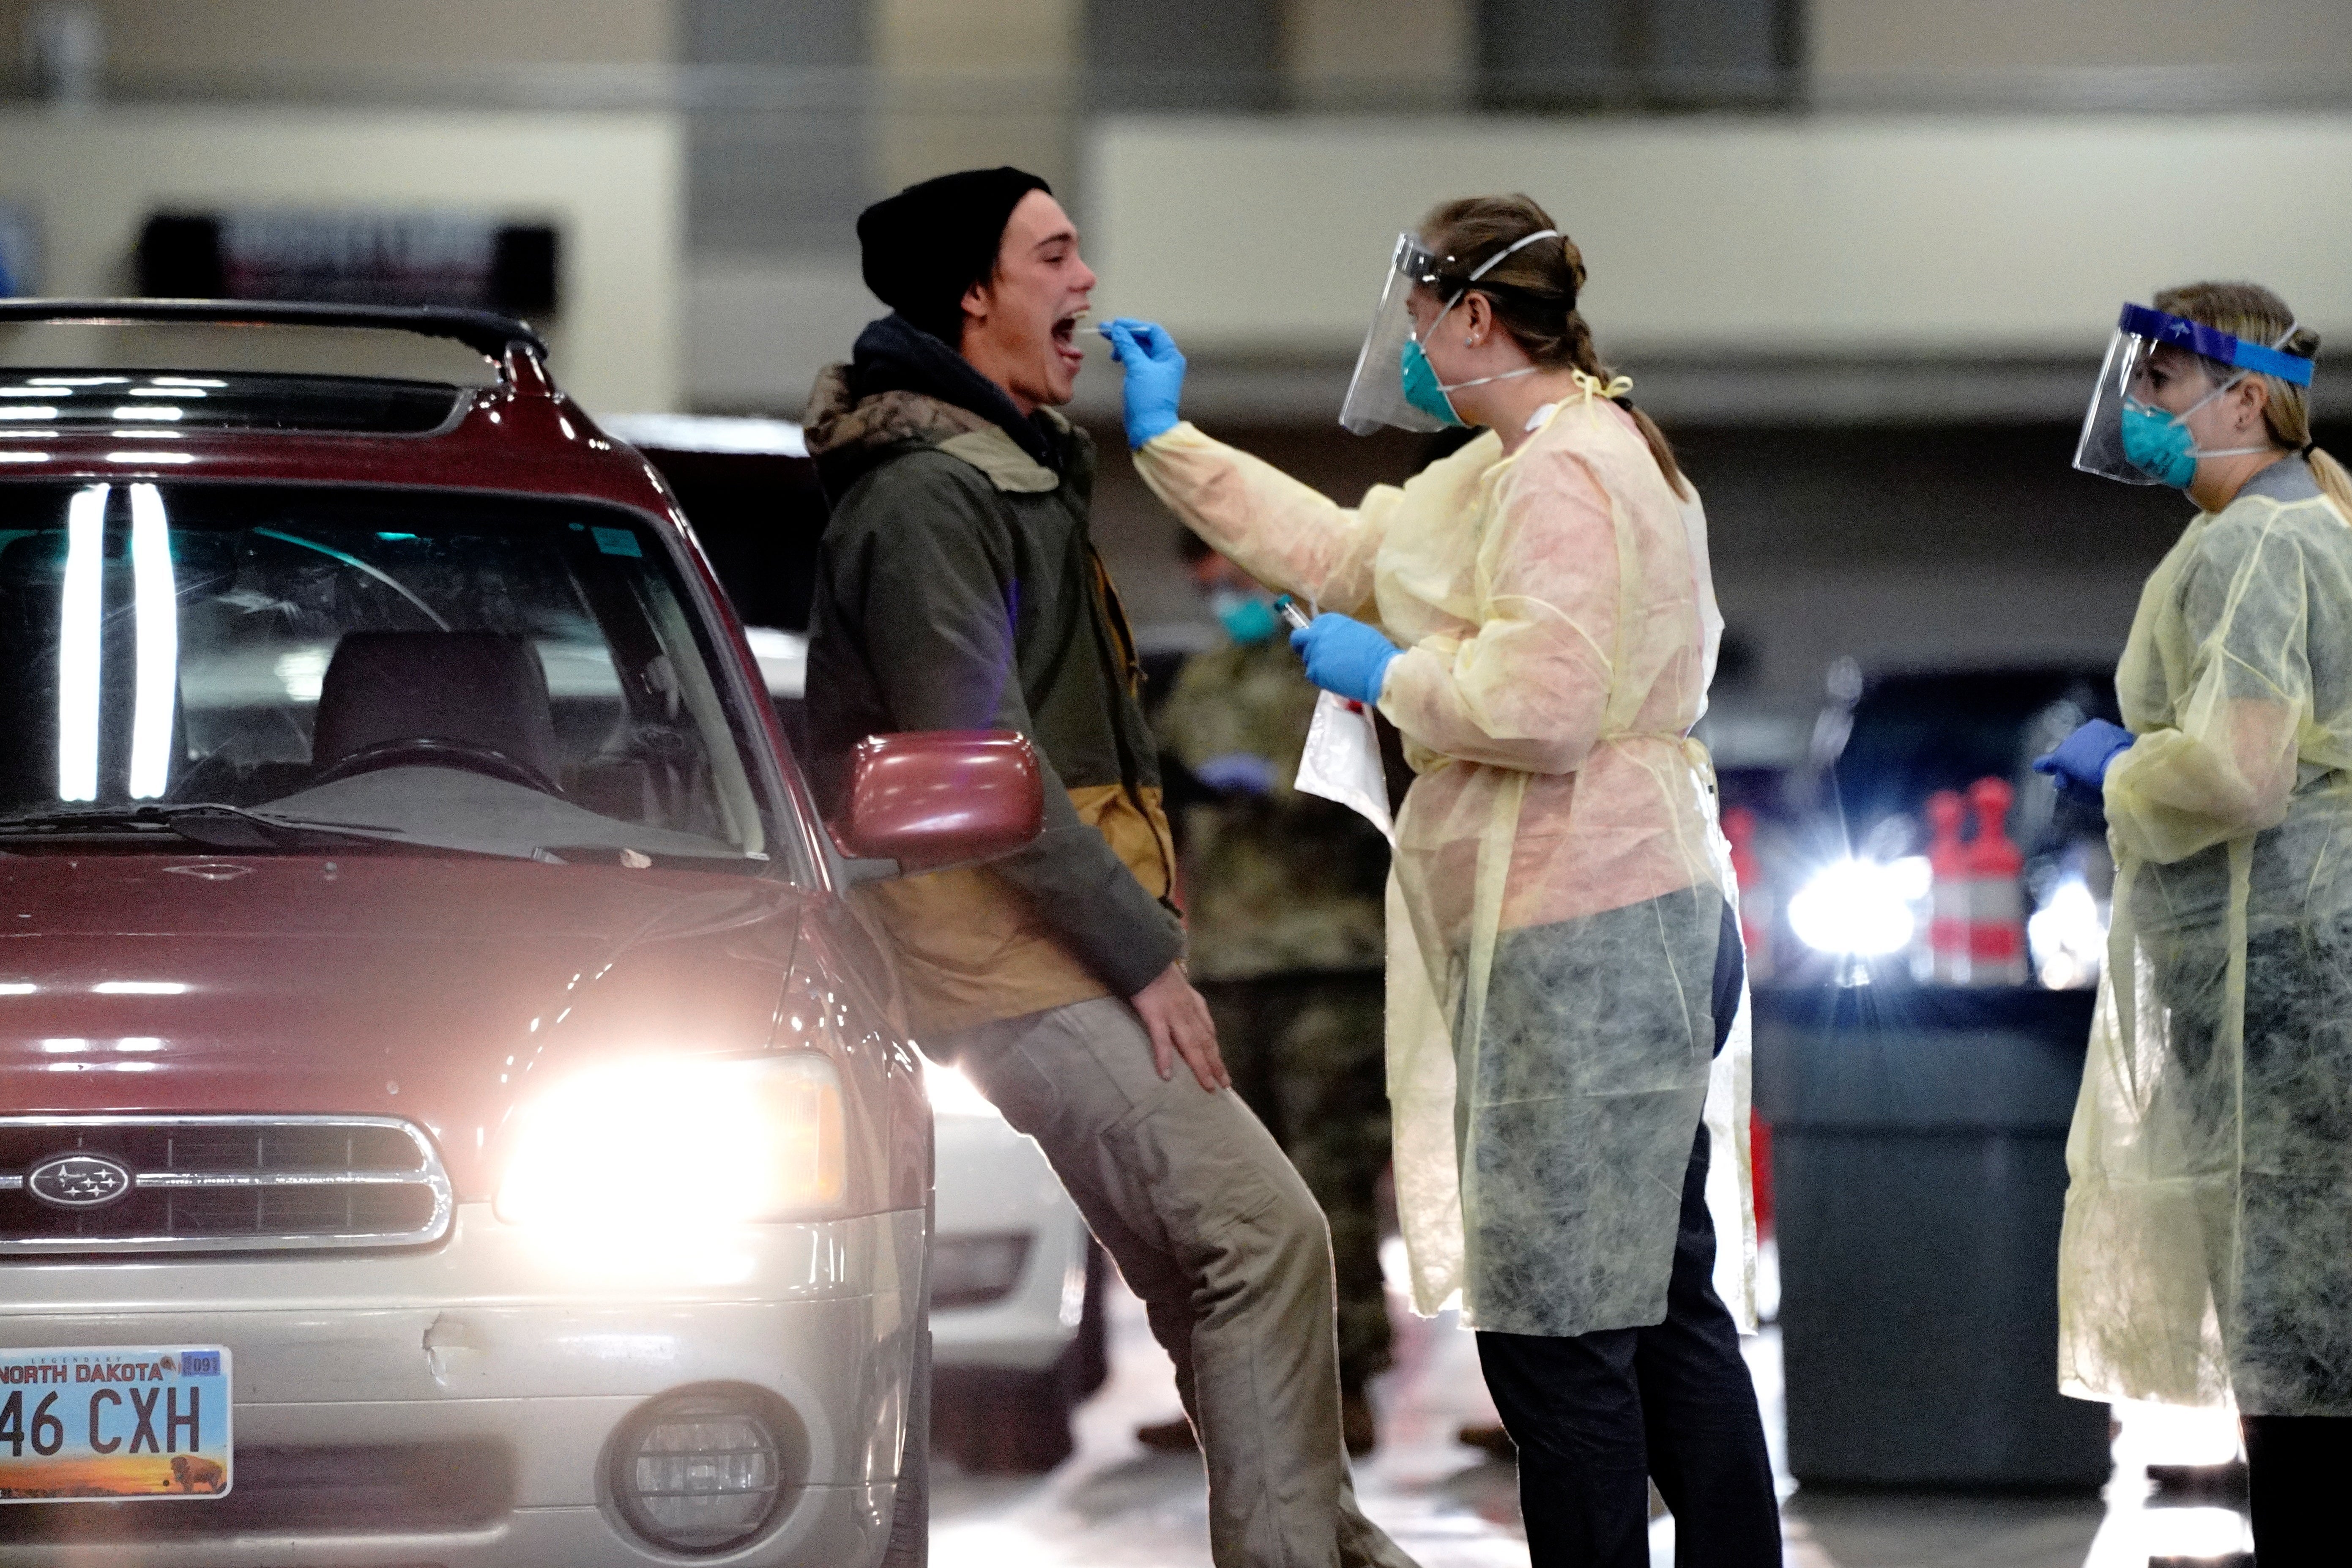 A medical worker in PPE swaps a man's throat as he stands beside a car.